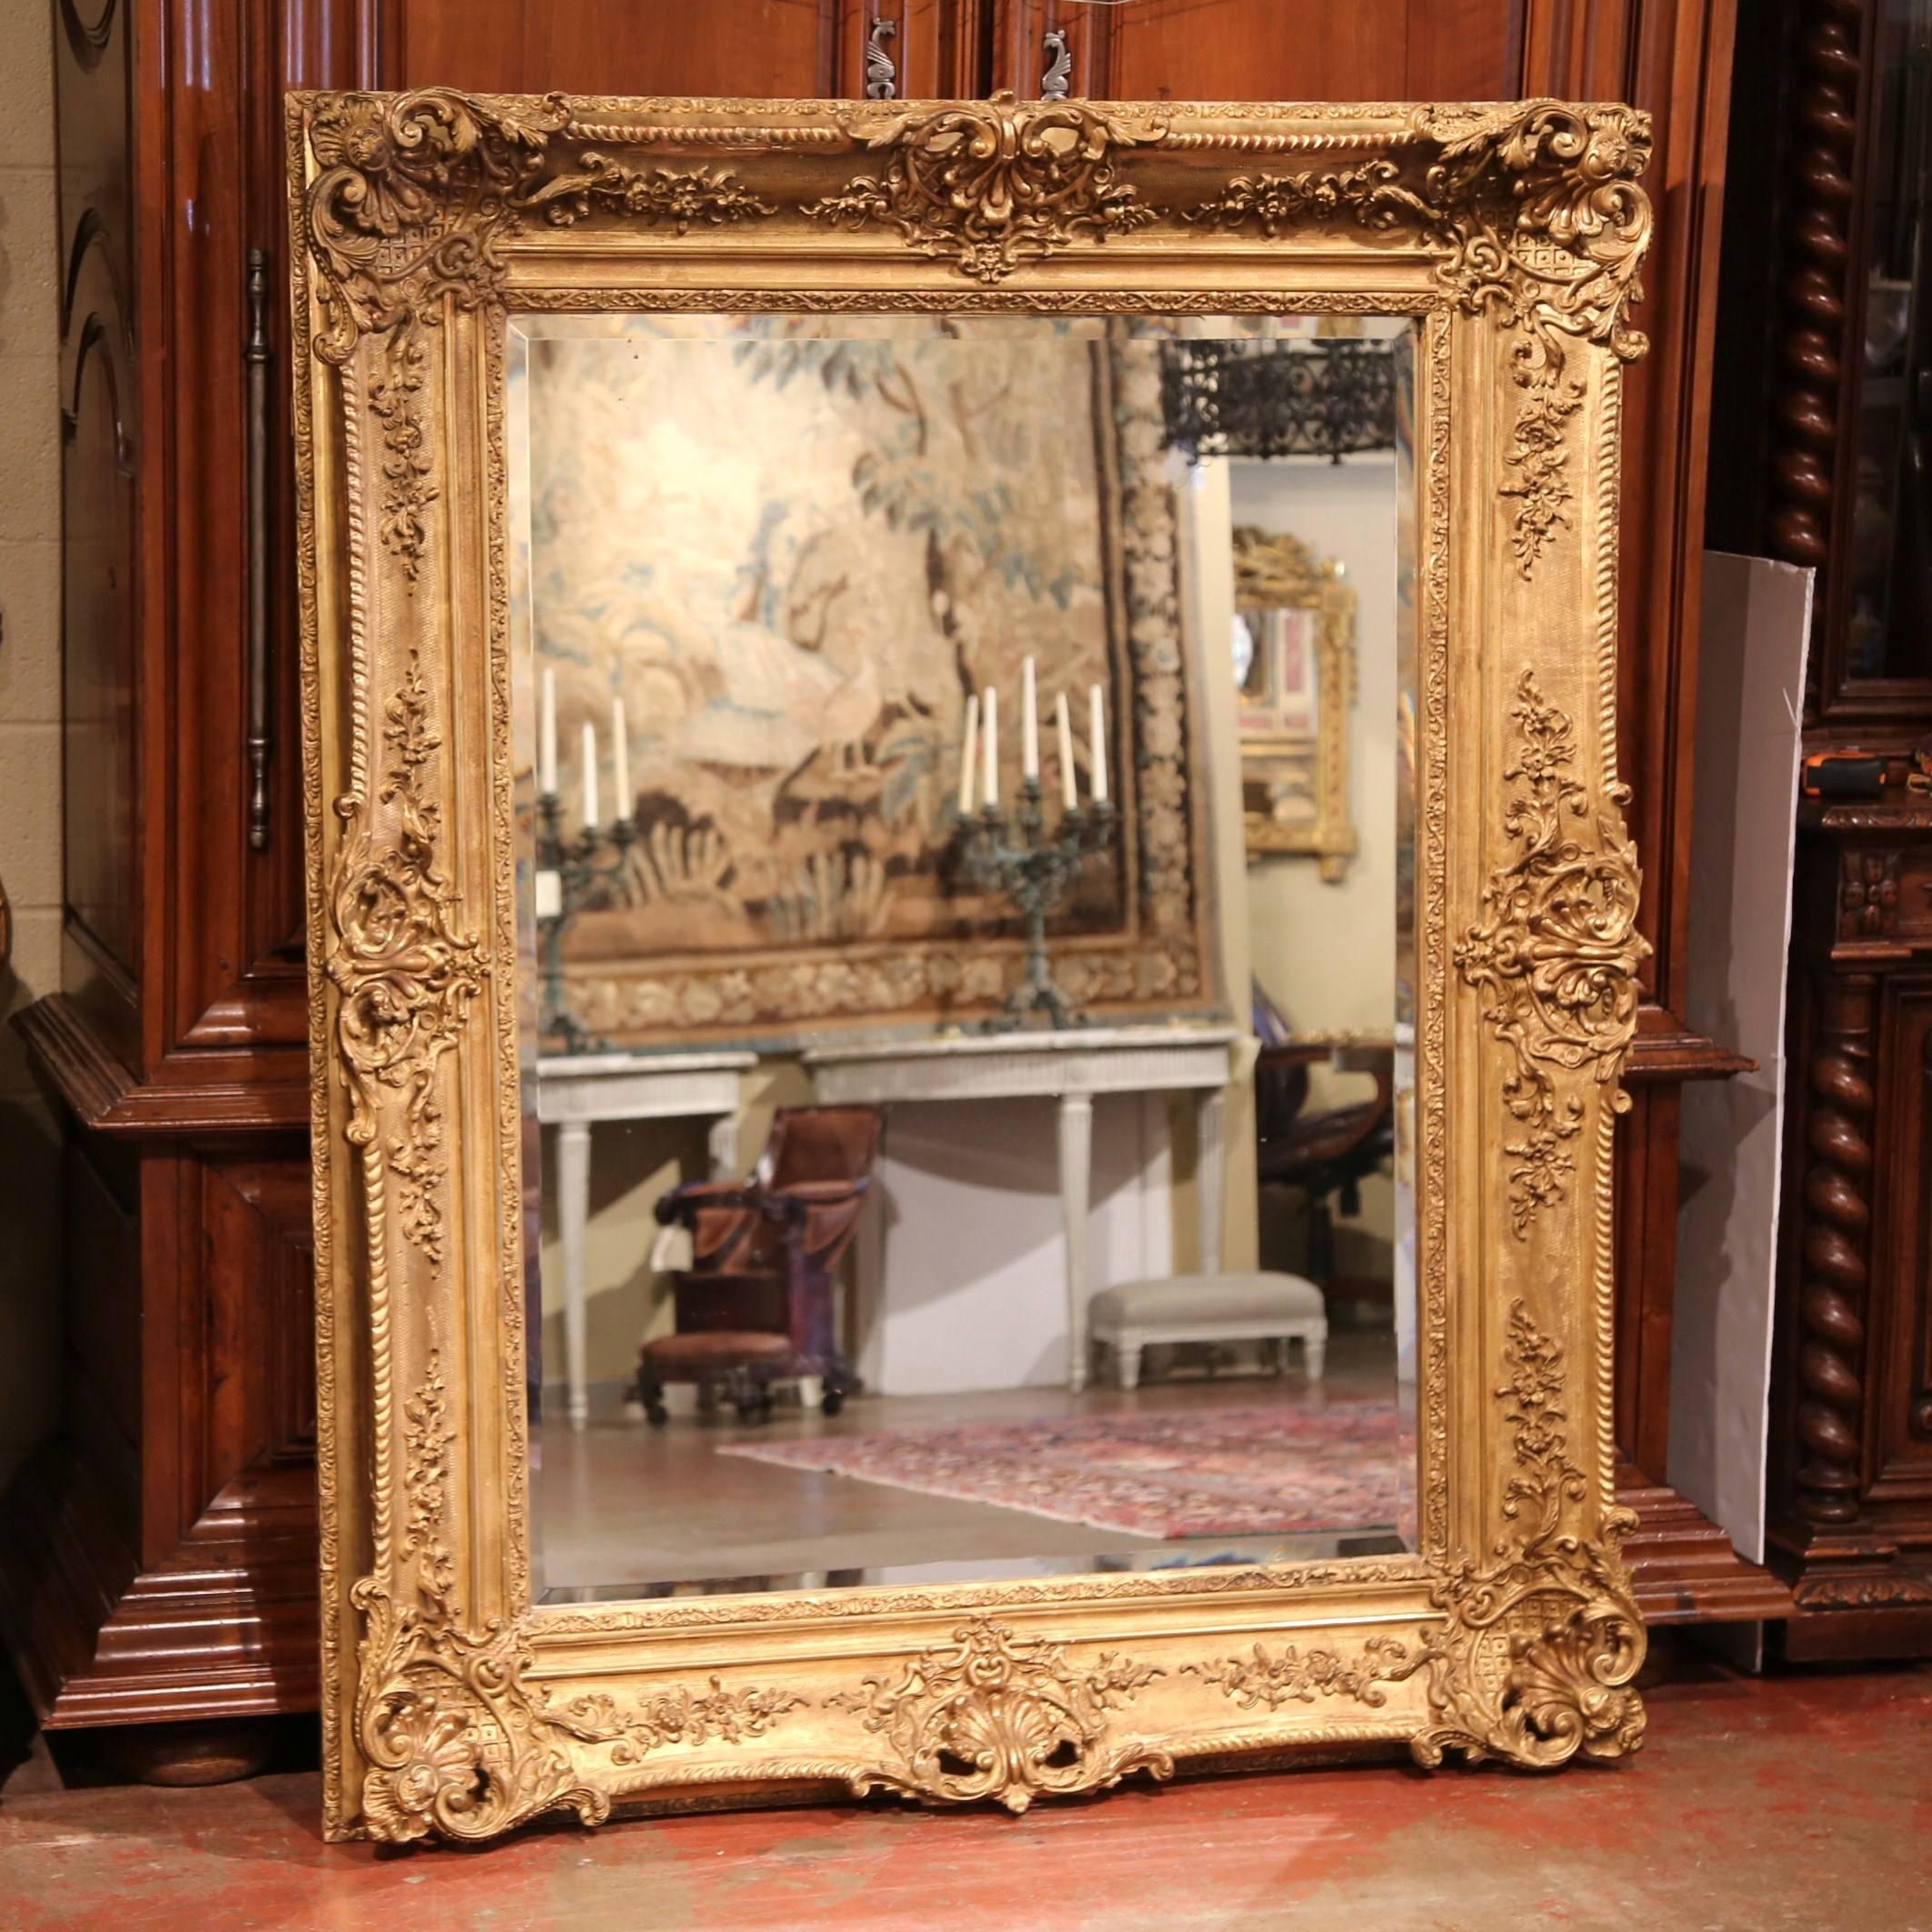 This elegant, antique mirror was created in France, circa 1860. Rectangular in shape, the large, gold leaf frame features exquisite carvings including floral decor, and is embellished with a cartouche shell motif in each corner. This stately mirror